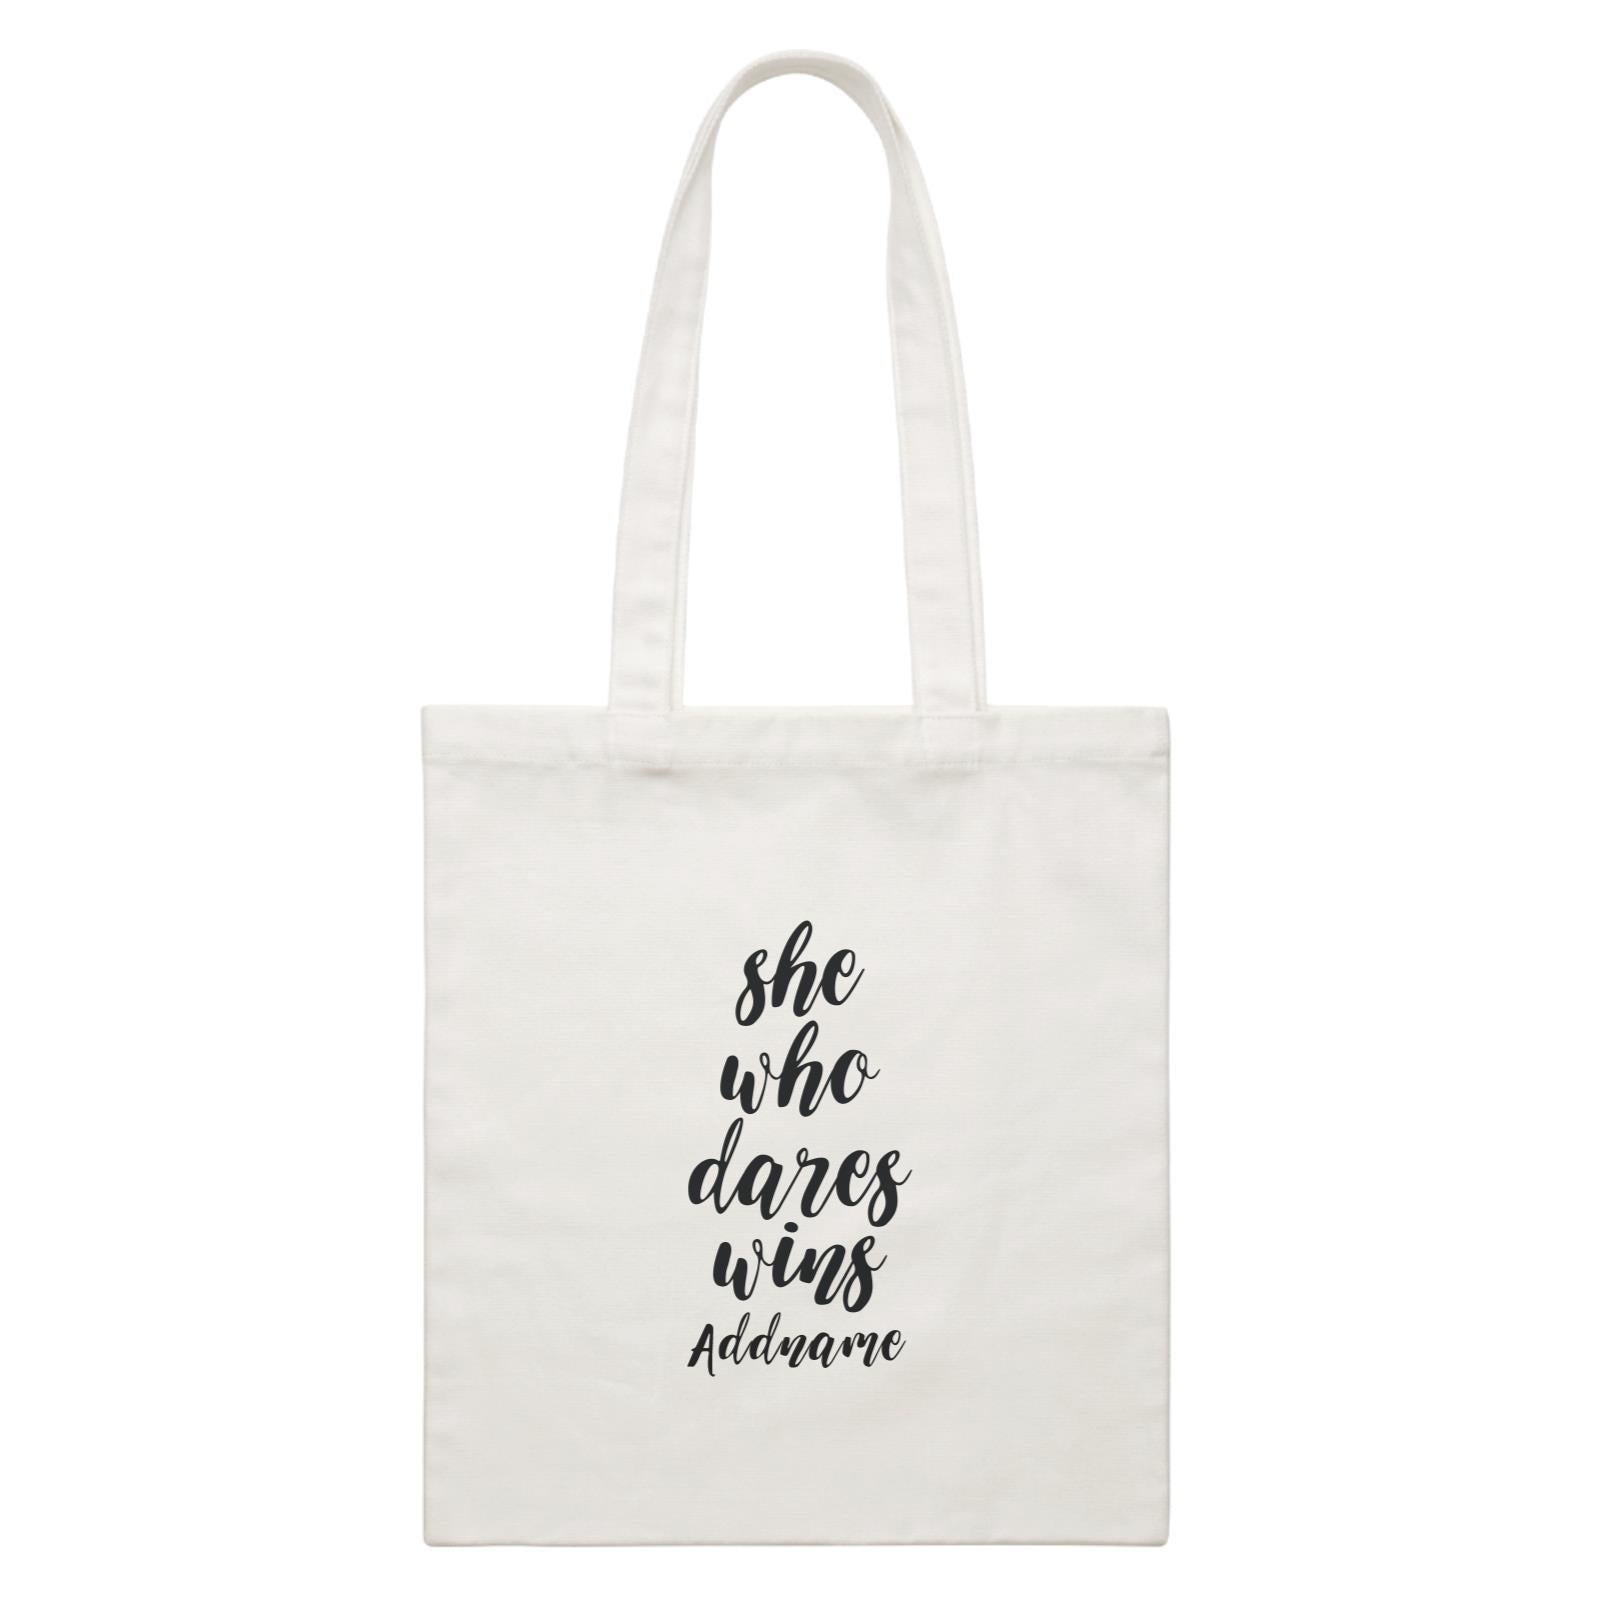 Girl Boss Quotes She Who Dares Wins Addname White Canvas Bag